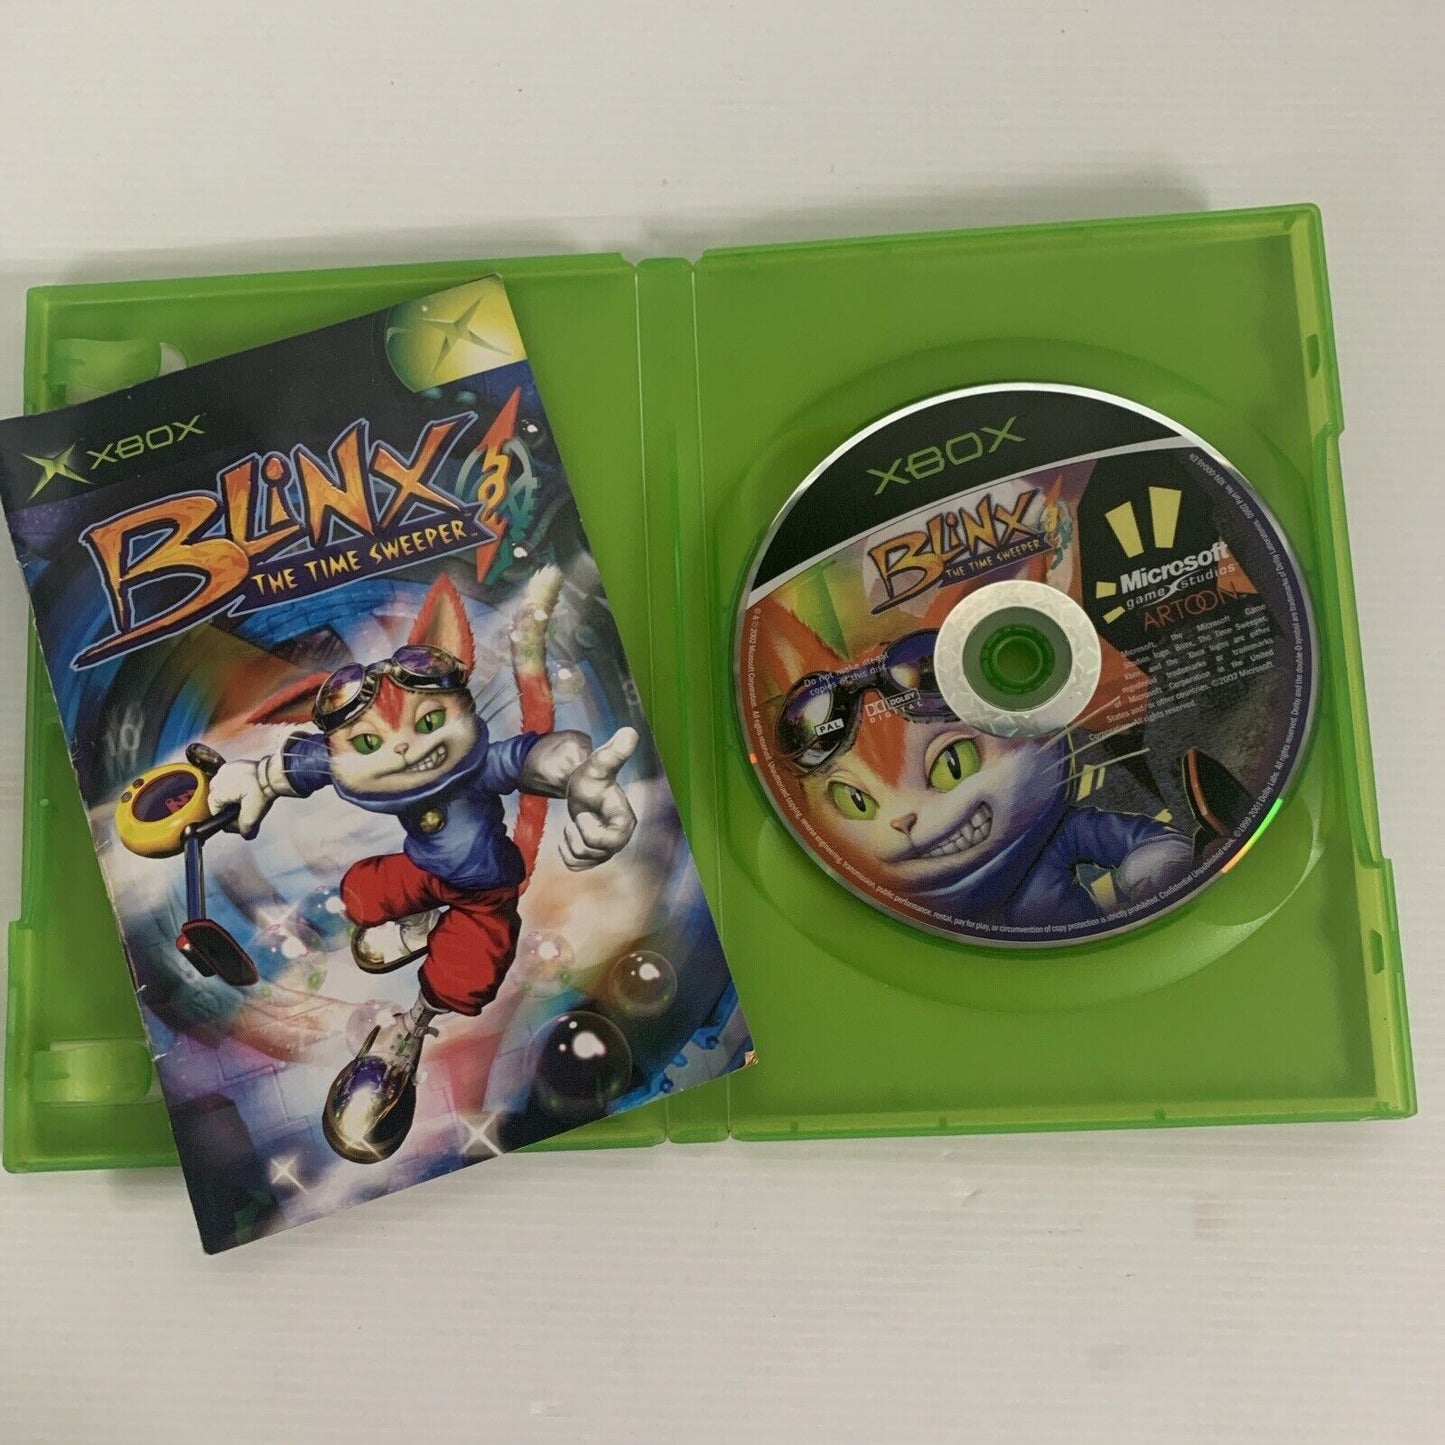 Blinx The Time Sweeper Xbox Original Game